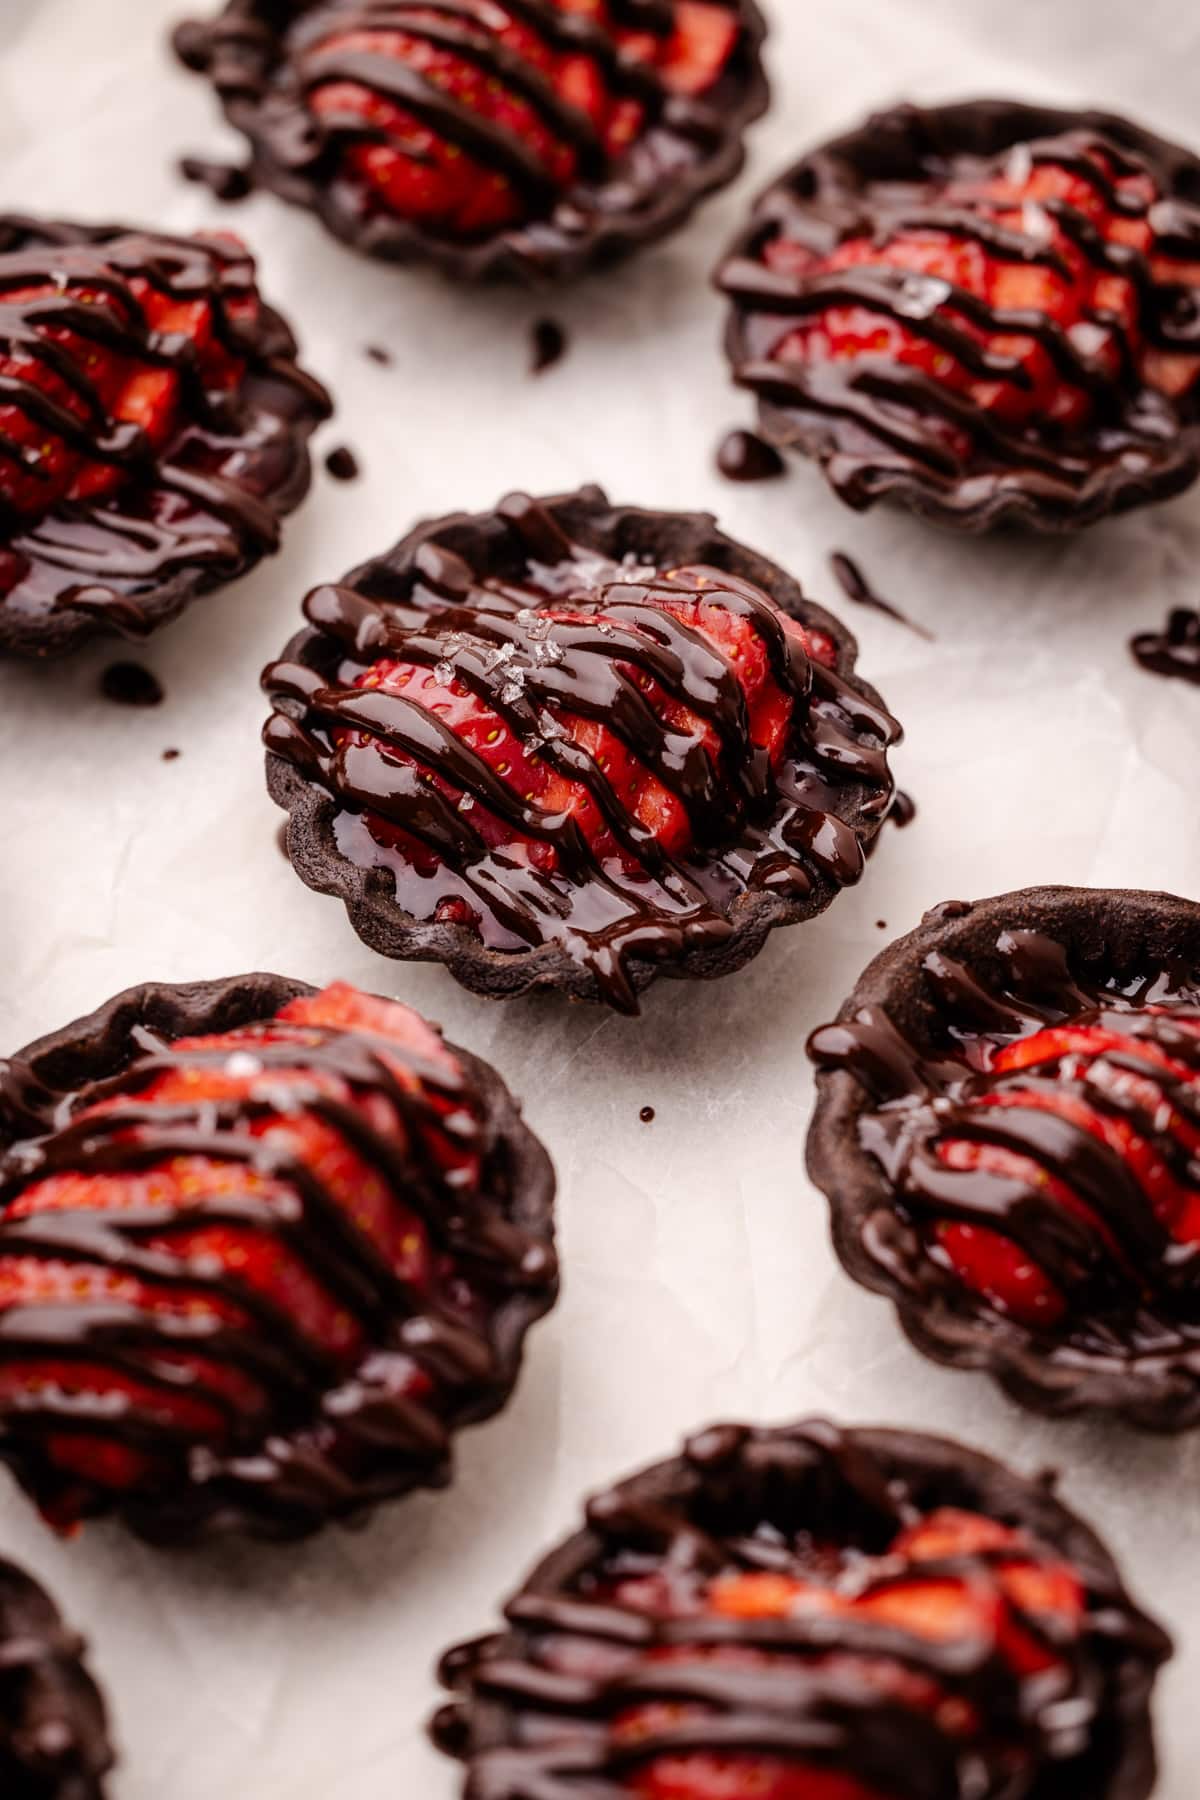 Chocolate strawberry tartlets drizzled with melted chocolate.